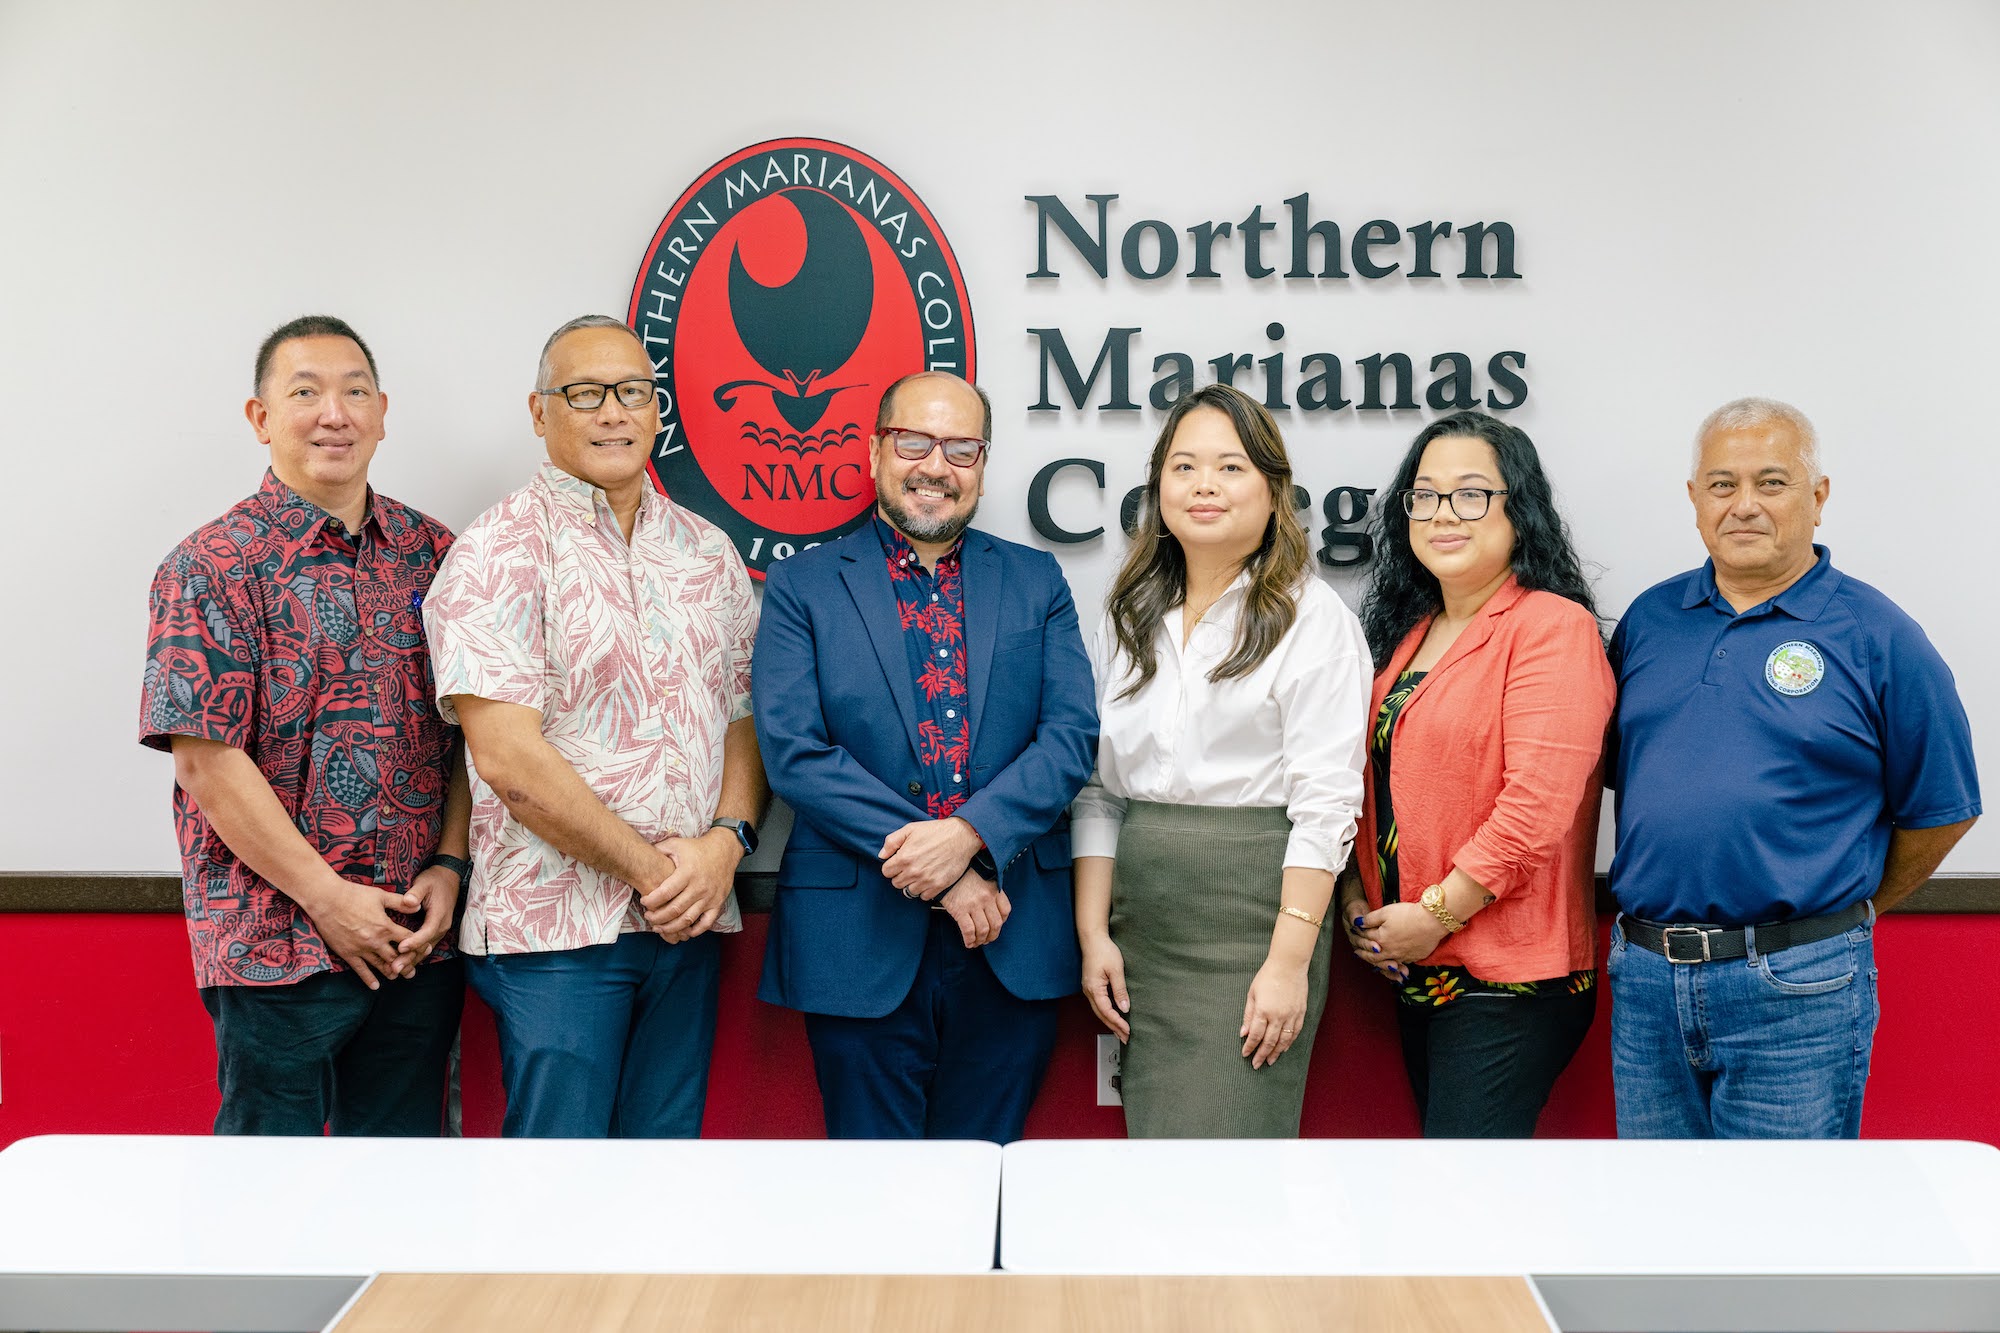 From left to right, Northern Marianas College regent Jesse M. Tudela, Board of Regents chair Charles V. Cepeda, NMC president Dr. Galvin Deleon Guerrero, regent Michelle L. Sablan, regent Zenie P. Mafnas, and NMC Foundation board chair Vicente Babauta after the press conference announcing Deleon Guerrero’s four-year contract renewal as NMC president yesterday morning at the Board of Regents conference room at the NMC campus.